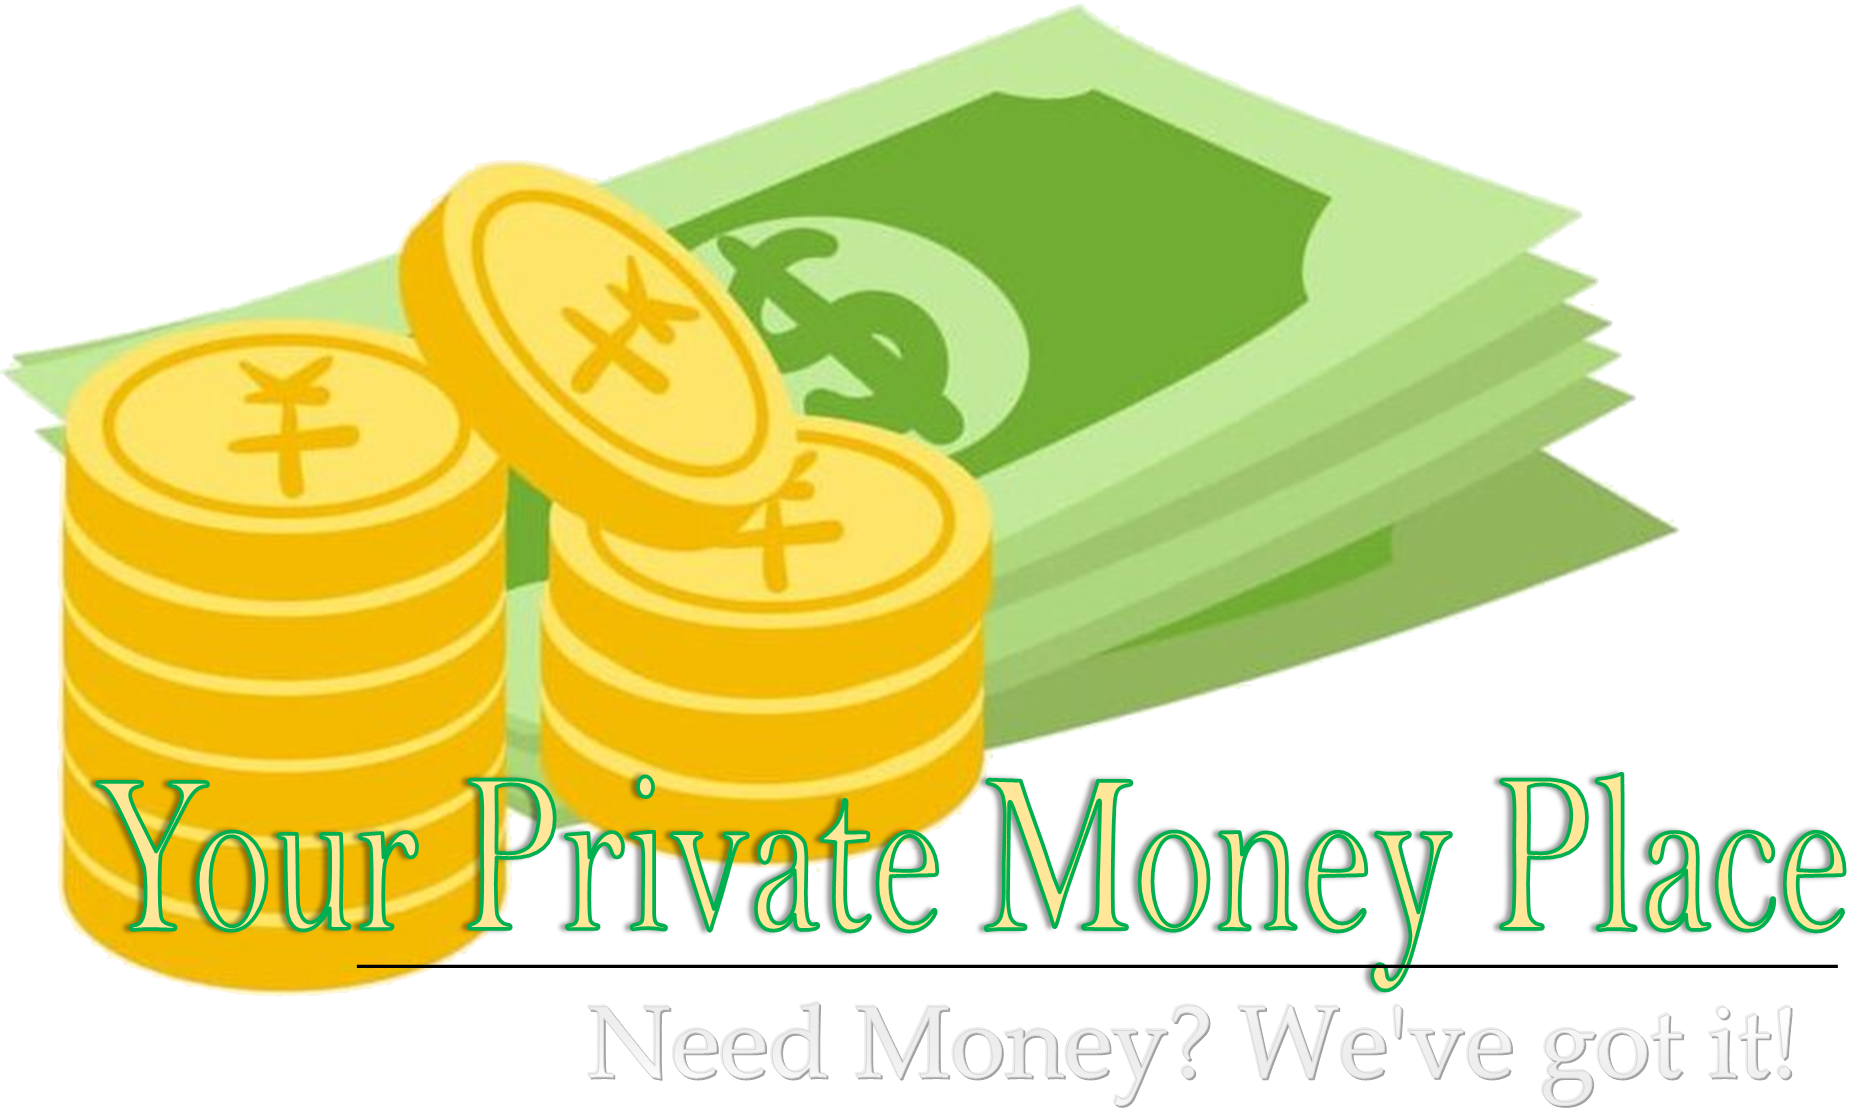 Your Private Money Place